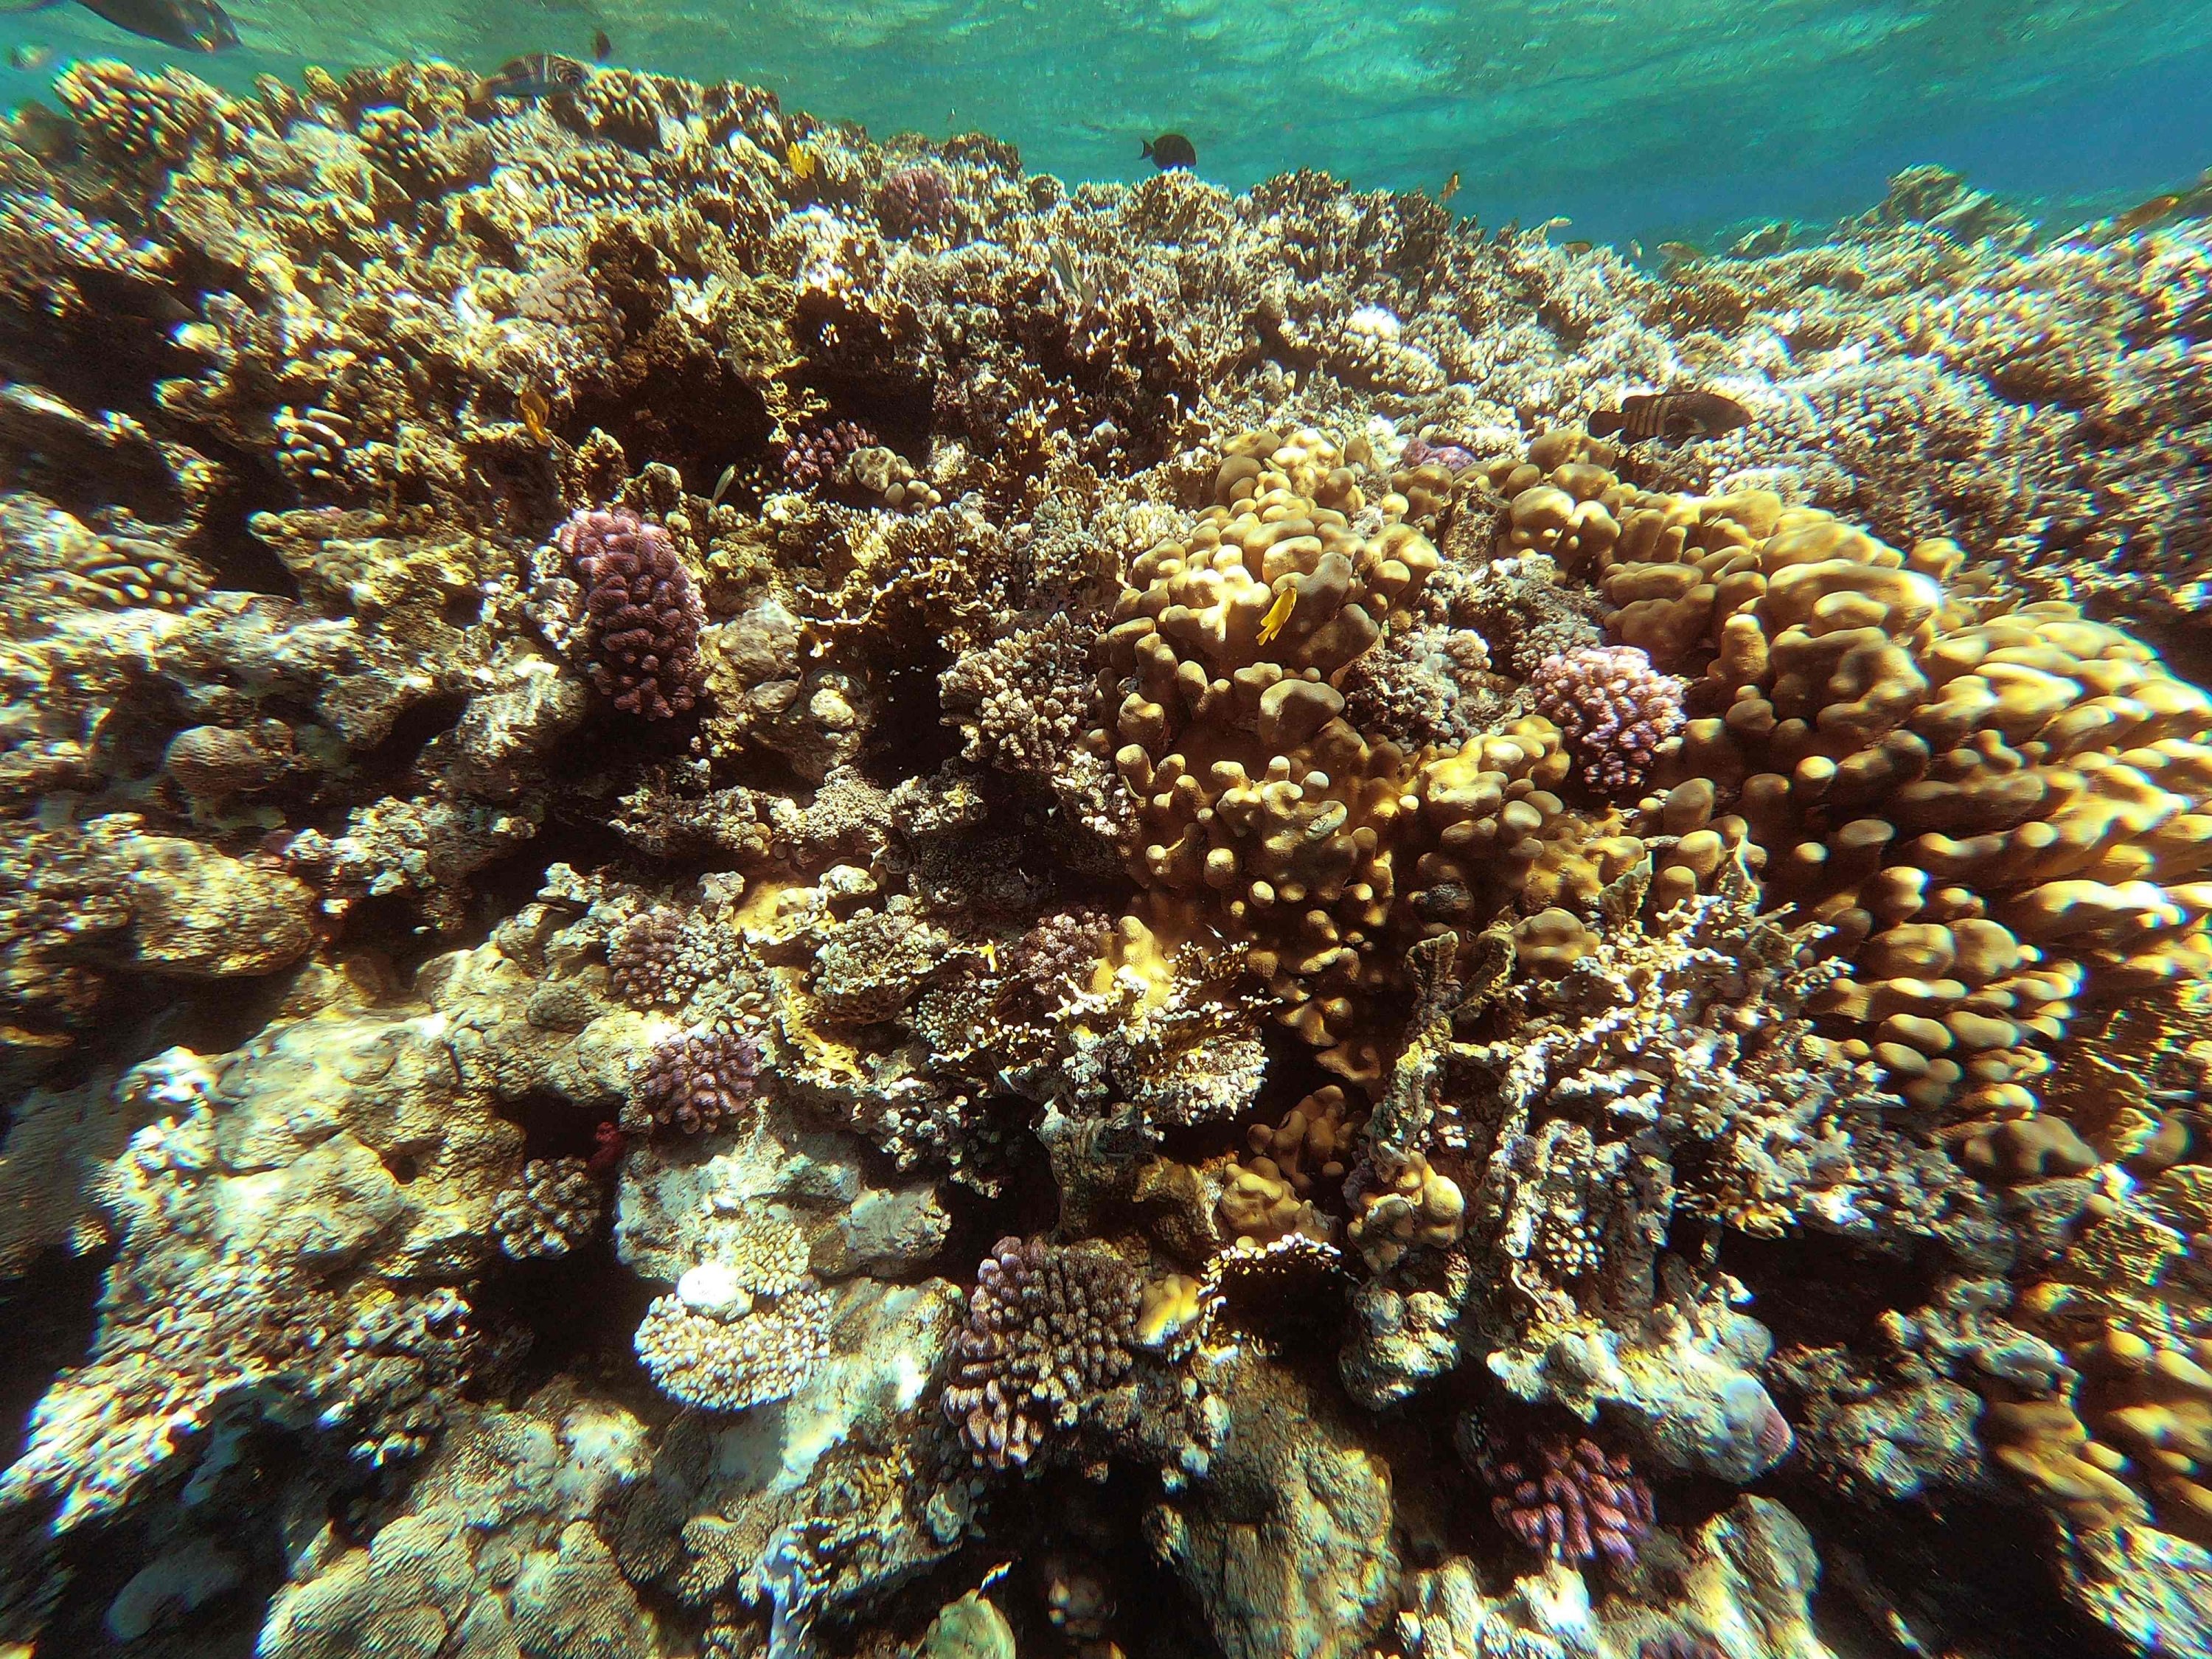 A coral reef near Egypt